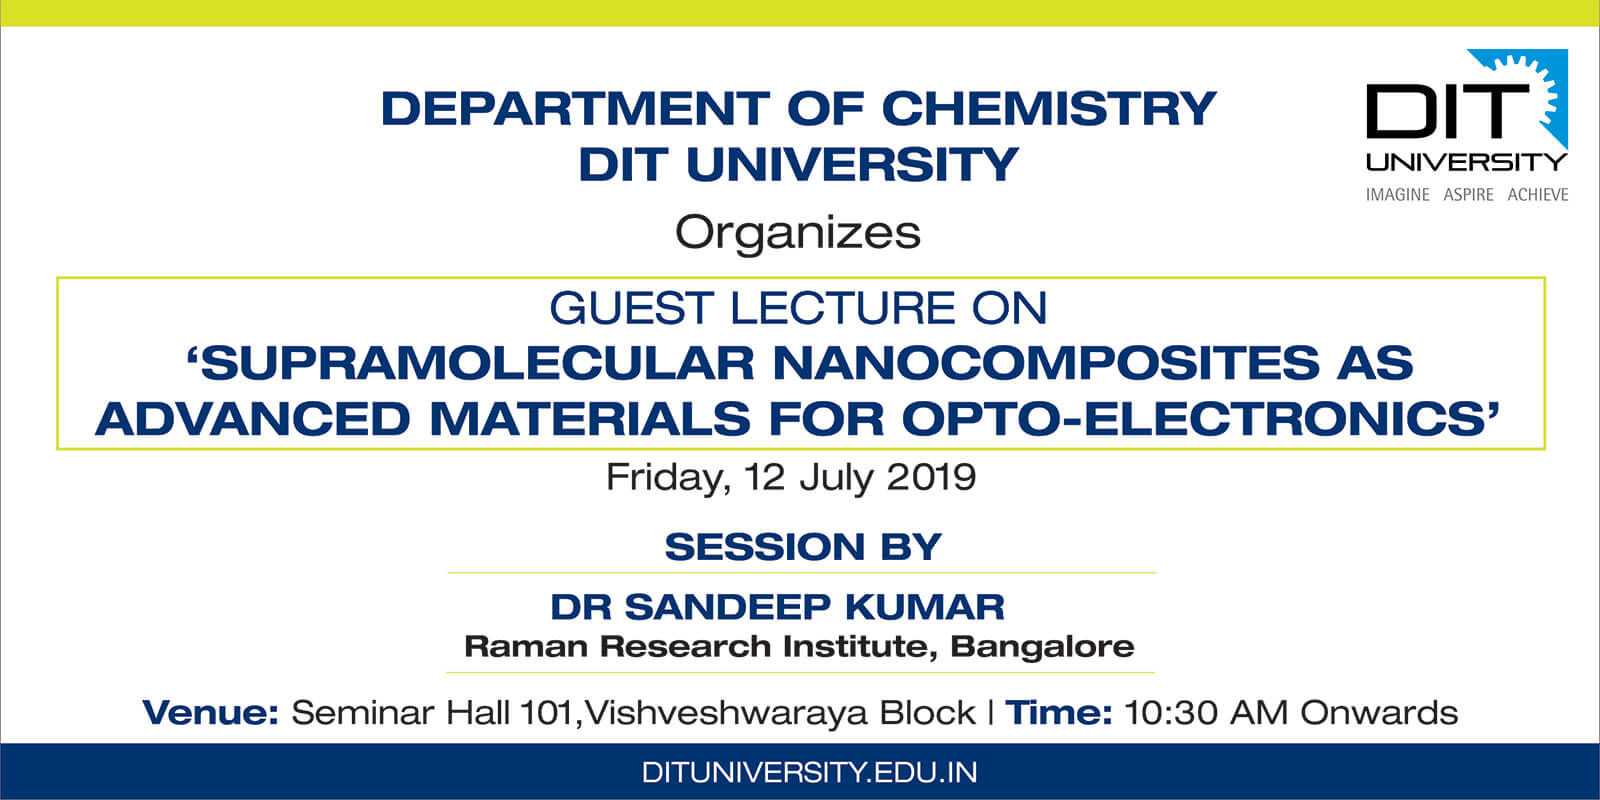 GUEST LECTURE ON ‘SUPRAMOLECULAR NANOCOMPOSITES AS  ADVANCED MATERIALS FOR OPTO-ELECTRONICS’